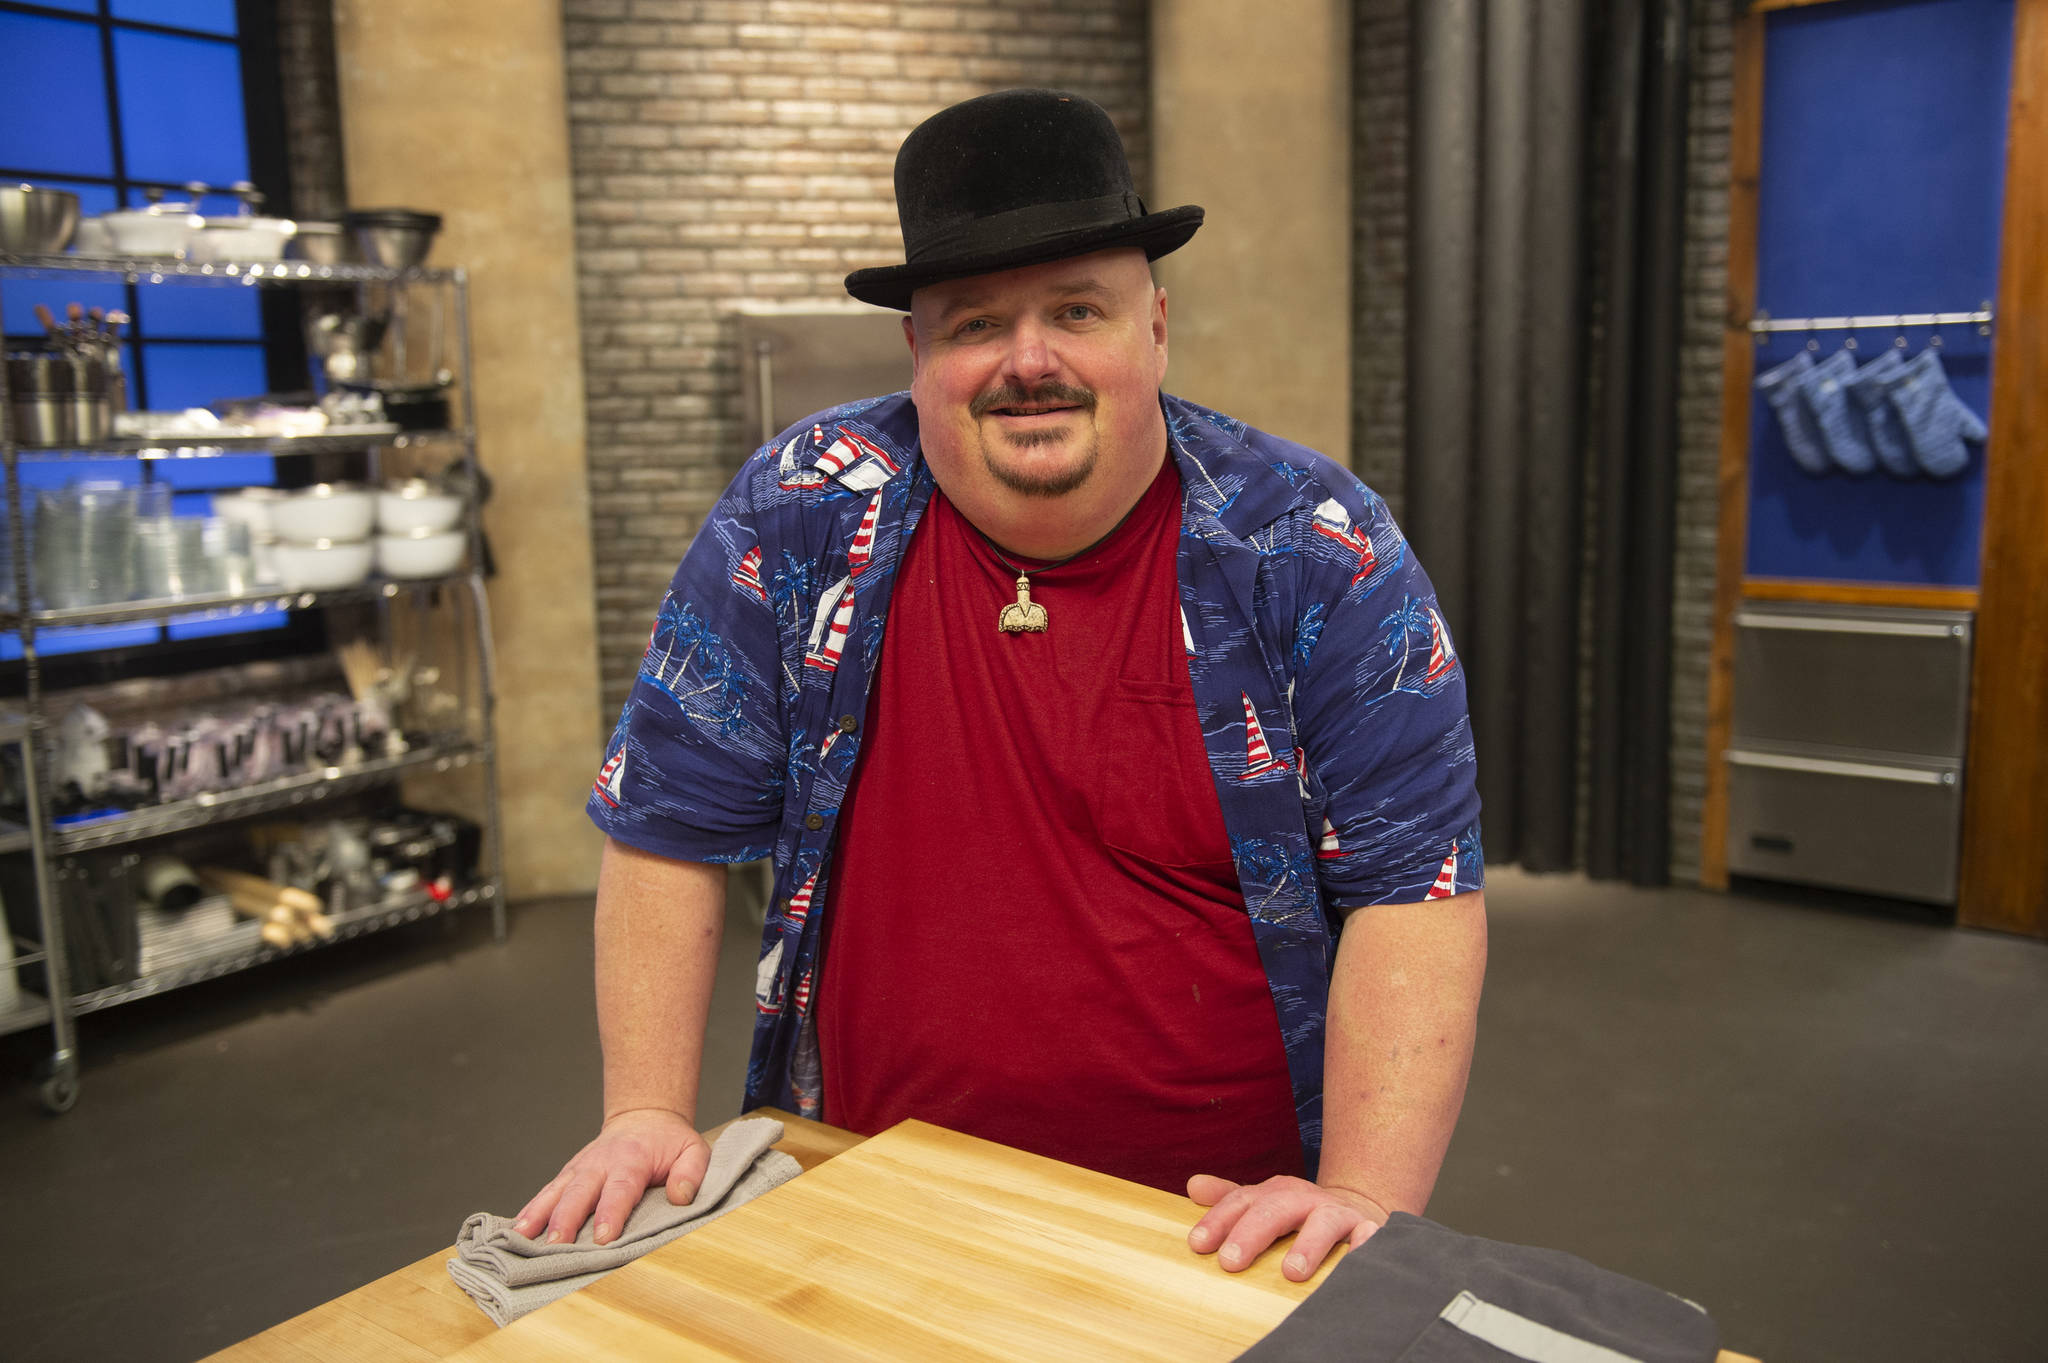 Contestant Charles “Chaz” Oakley, as seen on “Worst Cooks In America,” Season 15. (Photo courtesy of Food Network)